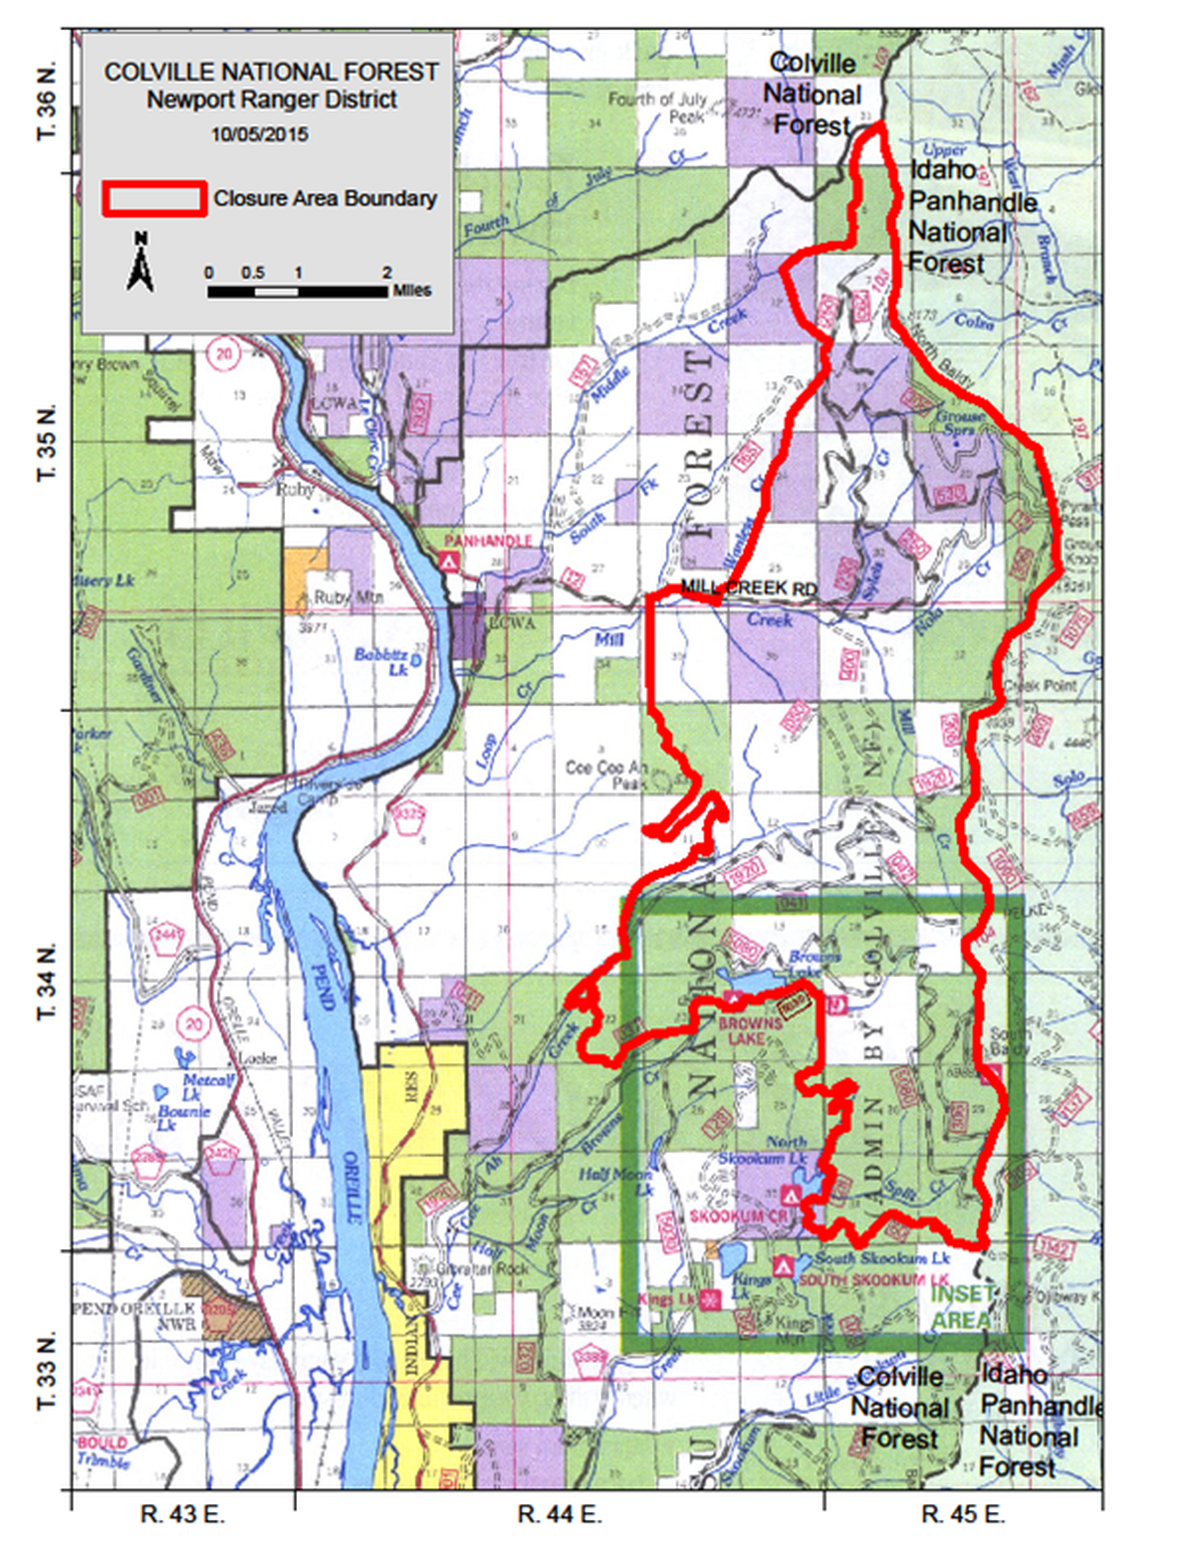 Colville National Forest Map Colville Forest Reopens More Wildfire Closures; Some Access Still Blocked |  The Spokesman-Review